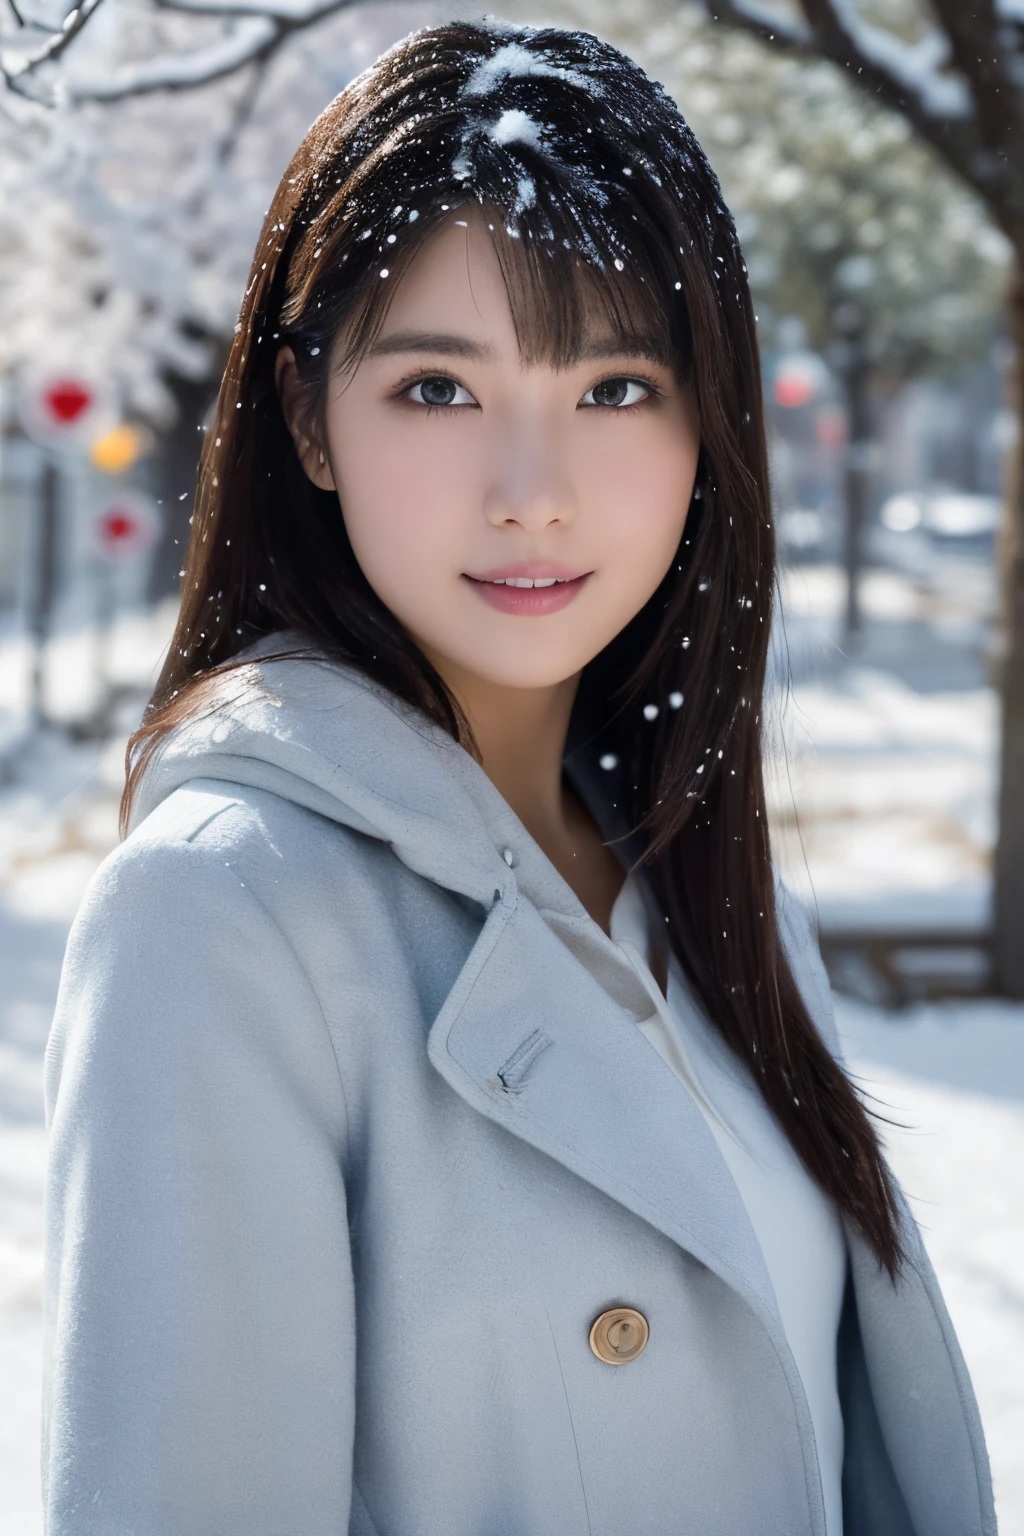 1girl in, (wear a platinum coat:1.2), (Raw photo, Best Quality), (Realistic, Photorealsitic:1.4), masutepiece, Extremely delicate and beautiful, Extremely detailed, 2k wallpaper, amazing, finely detail, the Extremely Detailed CG Unity 8K Wallpapers, Ultra-detailed, hight resolution, Soft light, Beautiful detailed girl, extremely detailed eye and face, beautiful detailed nose, Beautiful detailed eyes, Cinematic lighting, Illuminations coloring the city on a snowy night, (Illumination of street trees covered with snow like frost-covered trees:1.4), Snowy landscape, It's snowing, There&#39;There&#39;There&#39;There&#39;s snow in my hair, Perfect Anatomy, Slender body, Taut, 
Straight semi-long hair, Bangs, Looking at Viewer, A slight smil